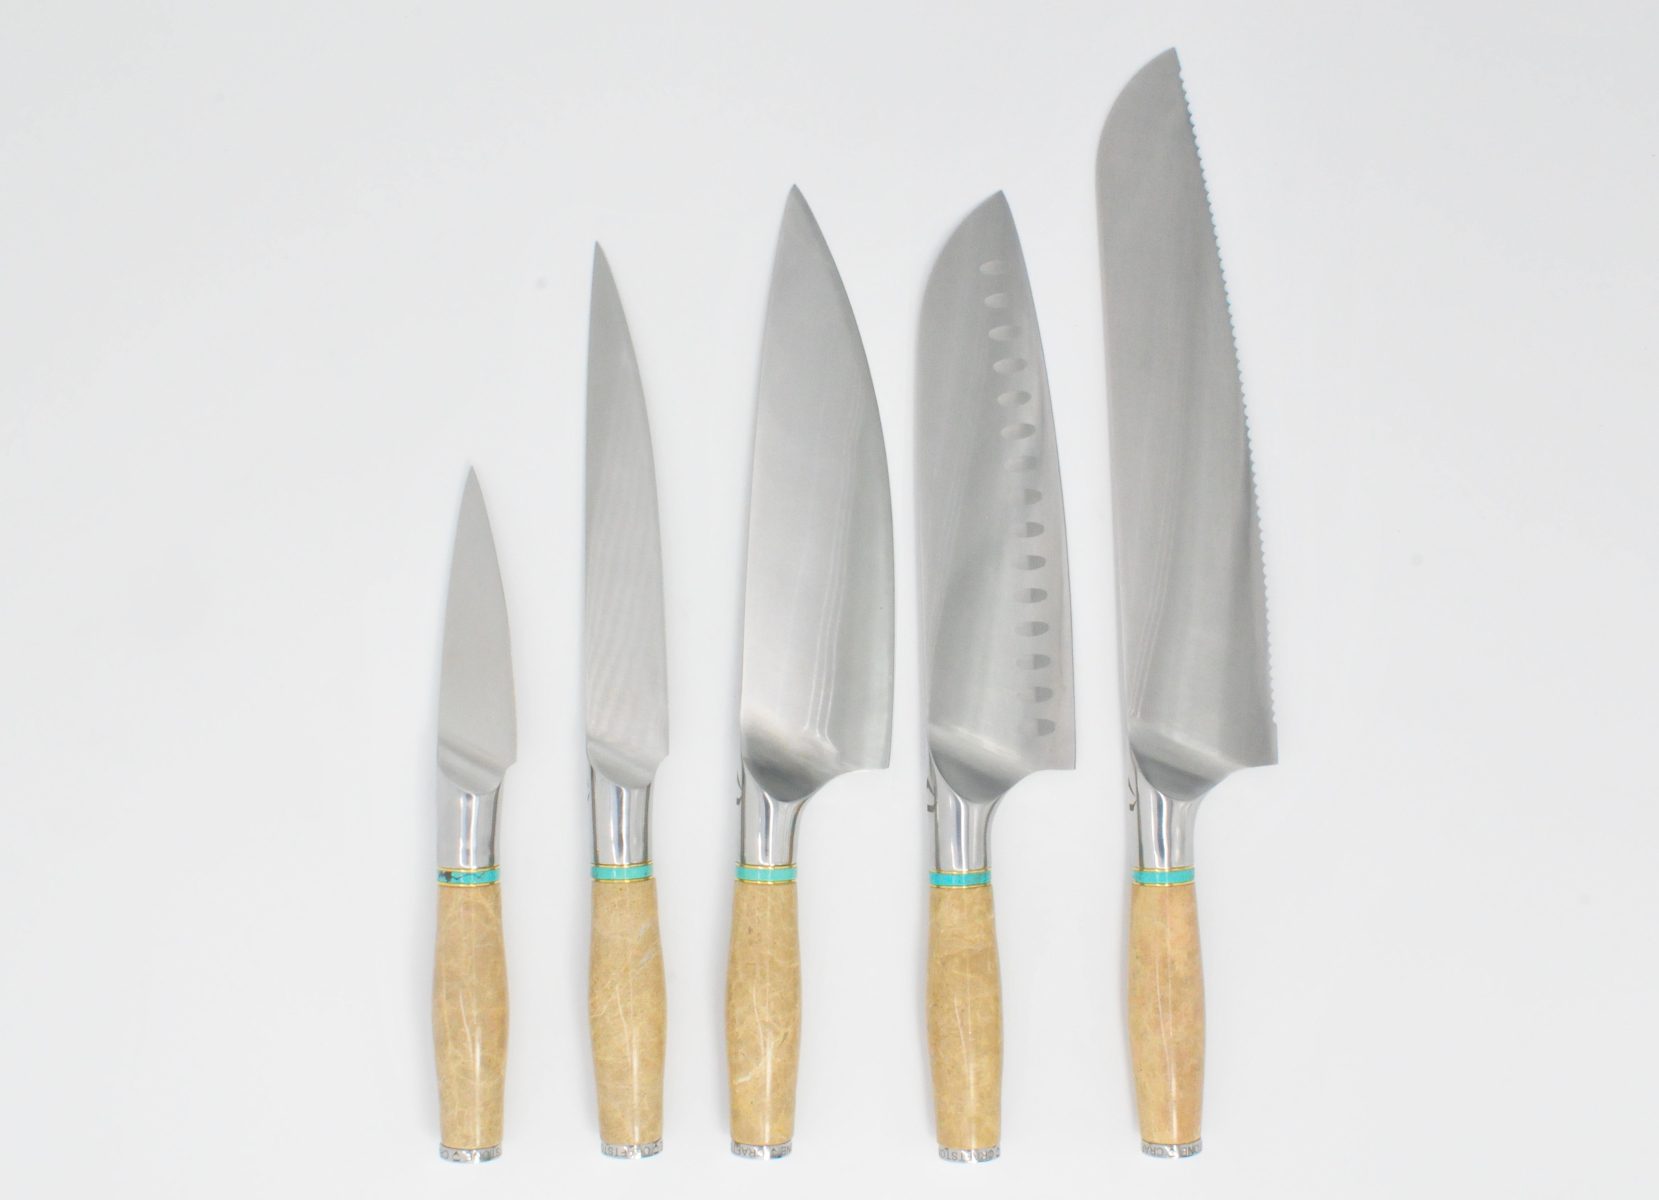 https://www.craftstoneknives.com/wp-content/uploads/bfi_thumb/5-Knife-set-with-a-Light-Emprador-Marble-Handle-Swiss-Blue-Cubic-Zirconia-Stone-at-the-Back-of-the-Knife-and-Turquoise-and-Brass-Decorative-Rings-39d9bq3hm9bh9ob7gicgei.jpg